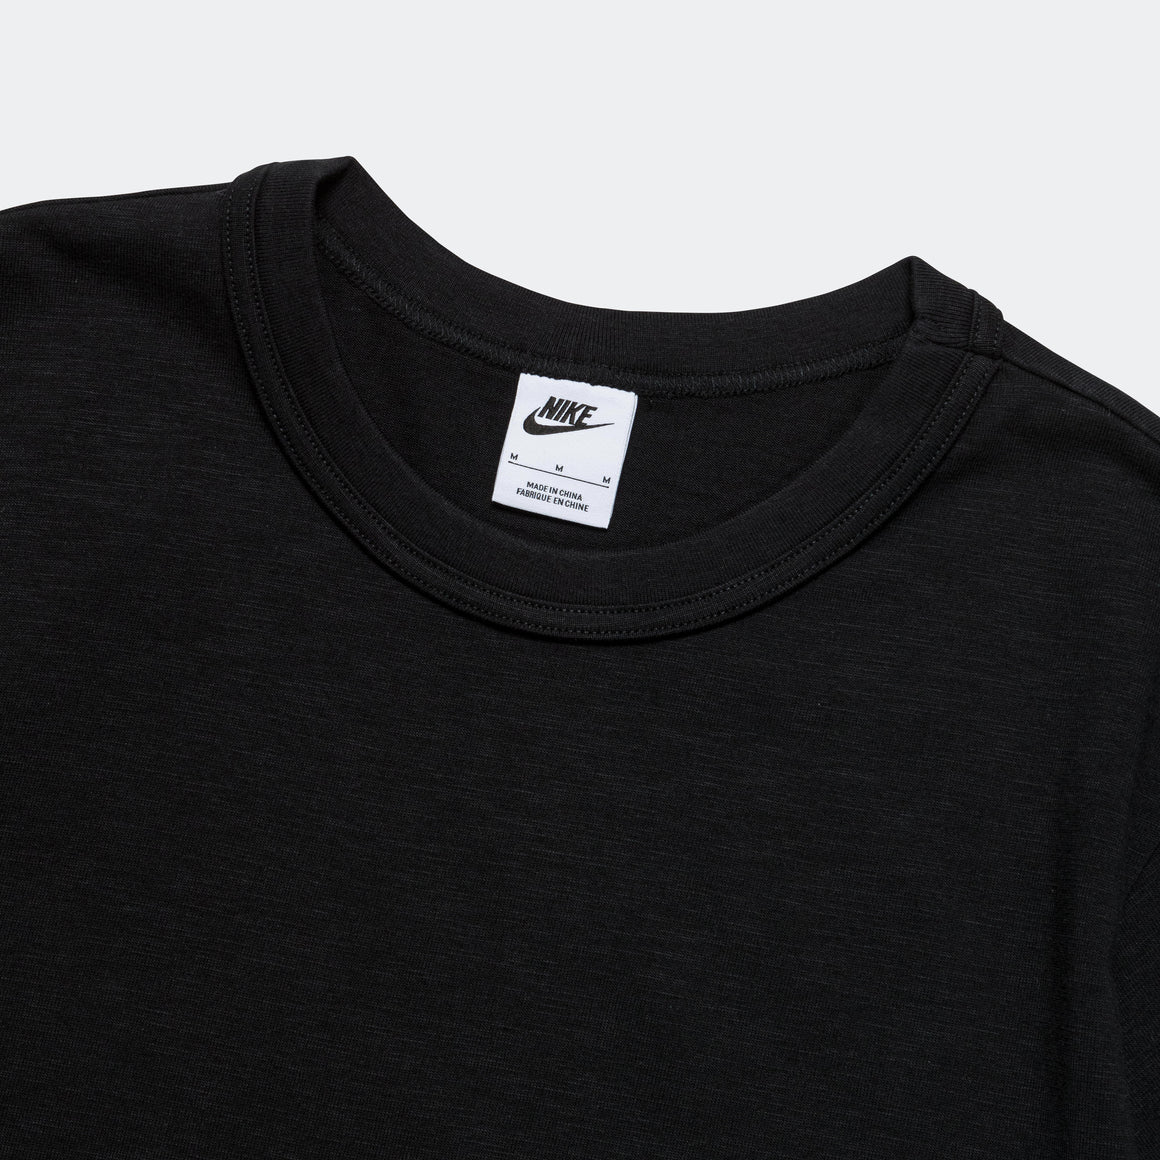 Nike - Nike Life SS Knit Top - Black - UP THERE